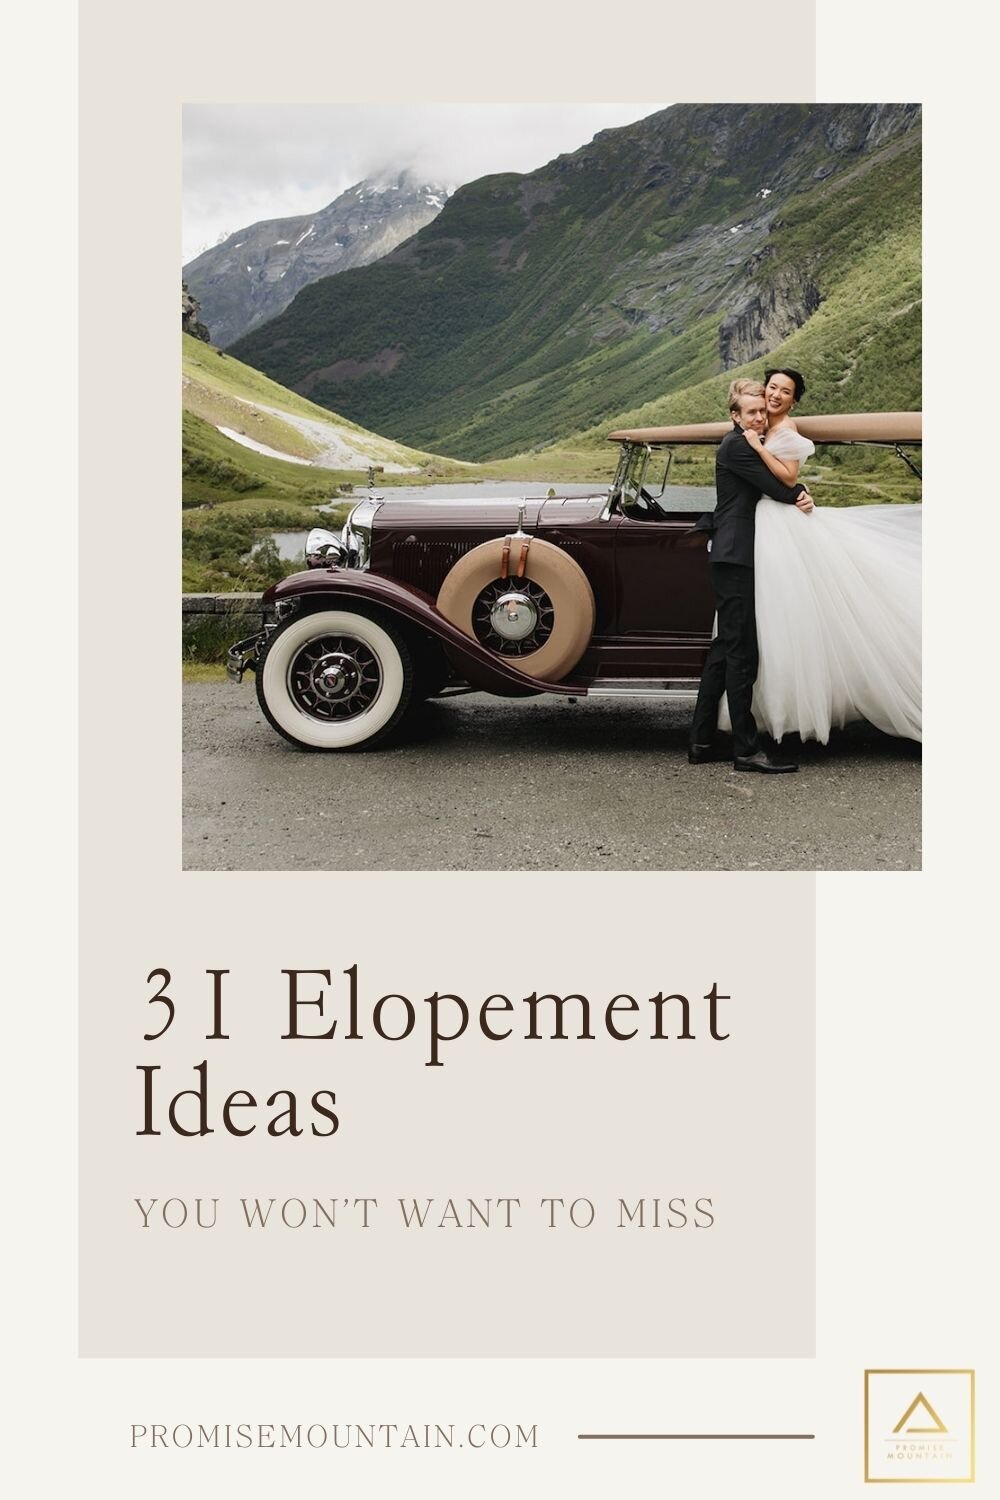 Bride and groom pose in front of their vintage getaway car; image overlaid with text that reads 31 Elopement Ideas You Won't Want to Miss